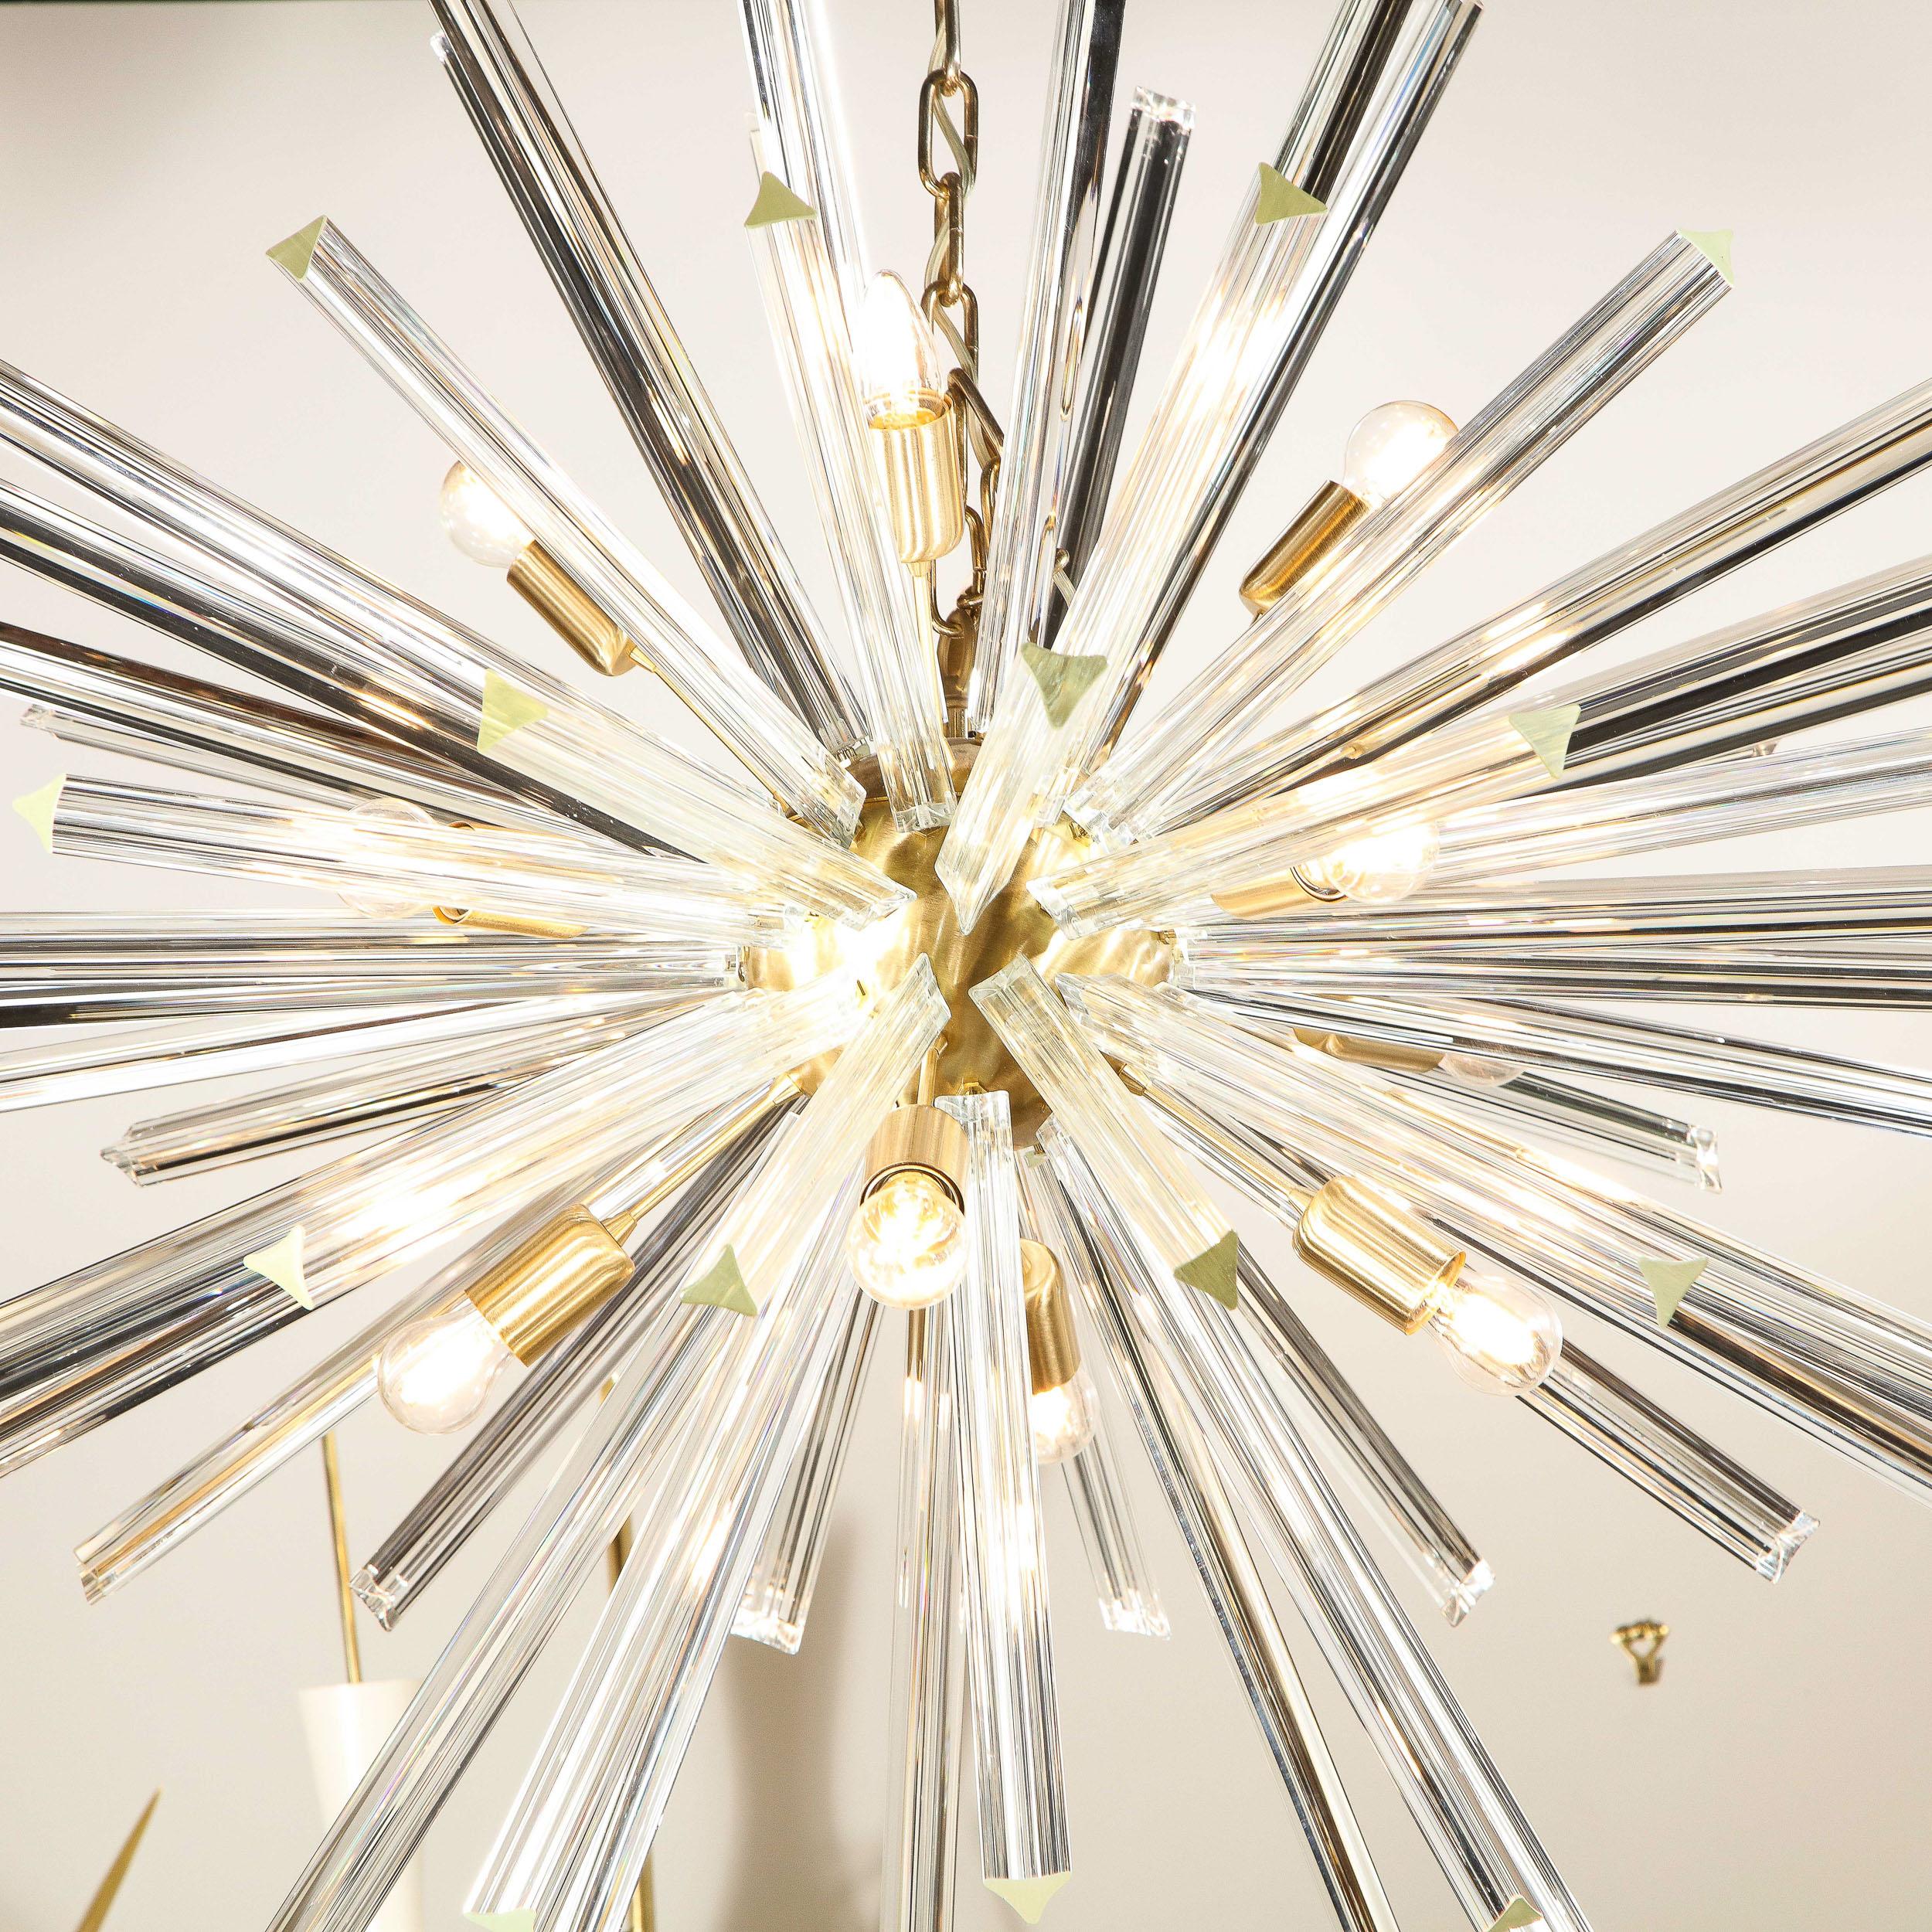 This elegant and graphic Sputnik chandelier was hand blown in Murano, Italy- the island off the coast of Venice renowned for centuries for its superlative glass production. It features a spherical central orb in brushed brass with an abundance of